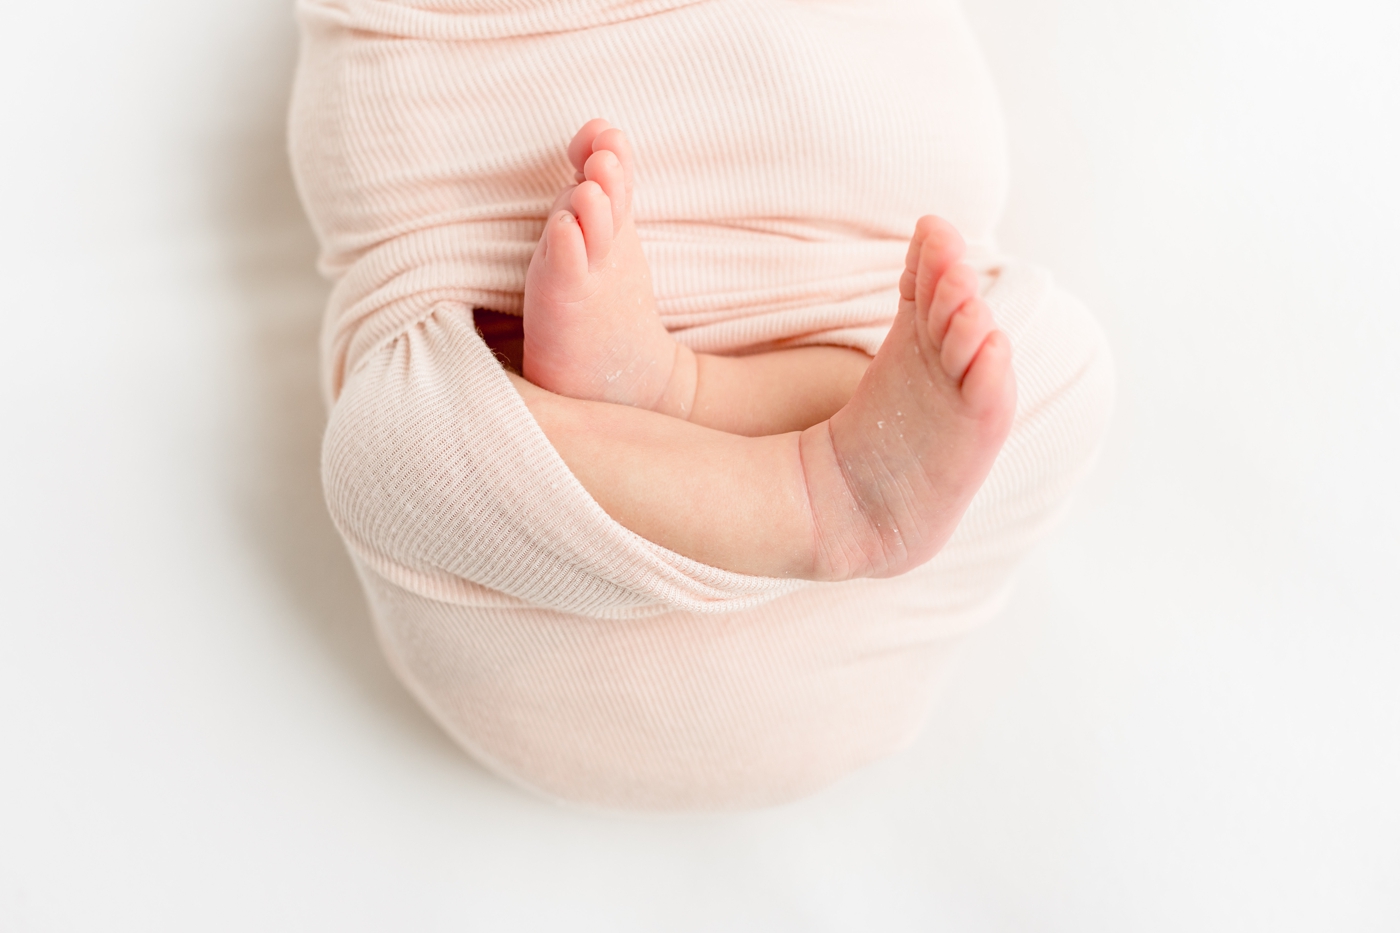 Closeup of baby feet during studio newborn session. Photo by Sana Ahmed Photography.